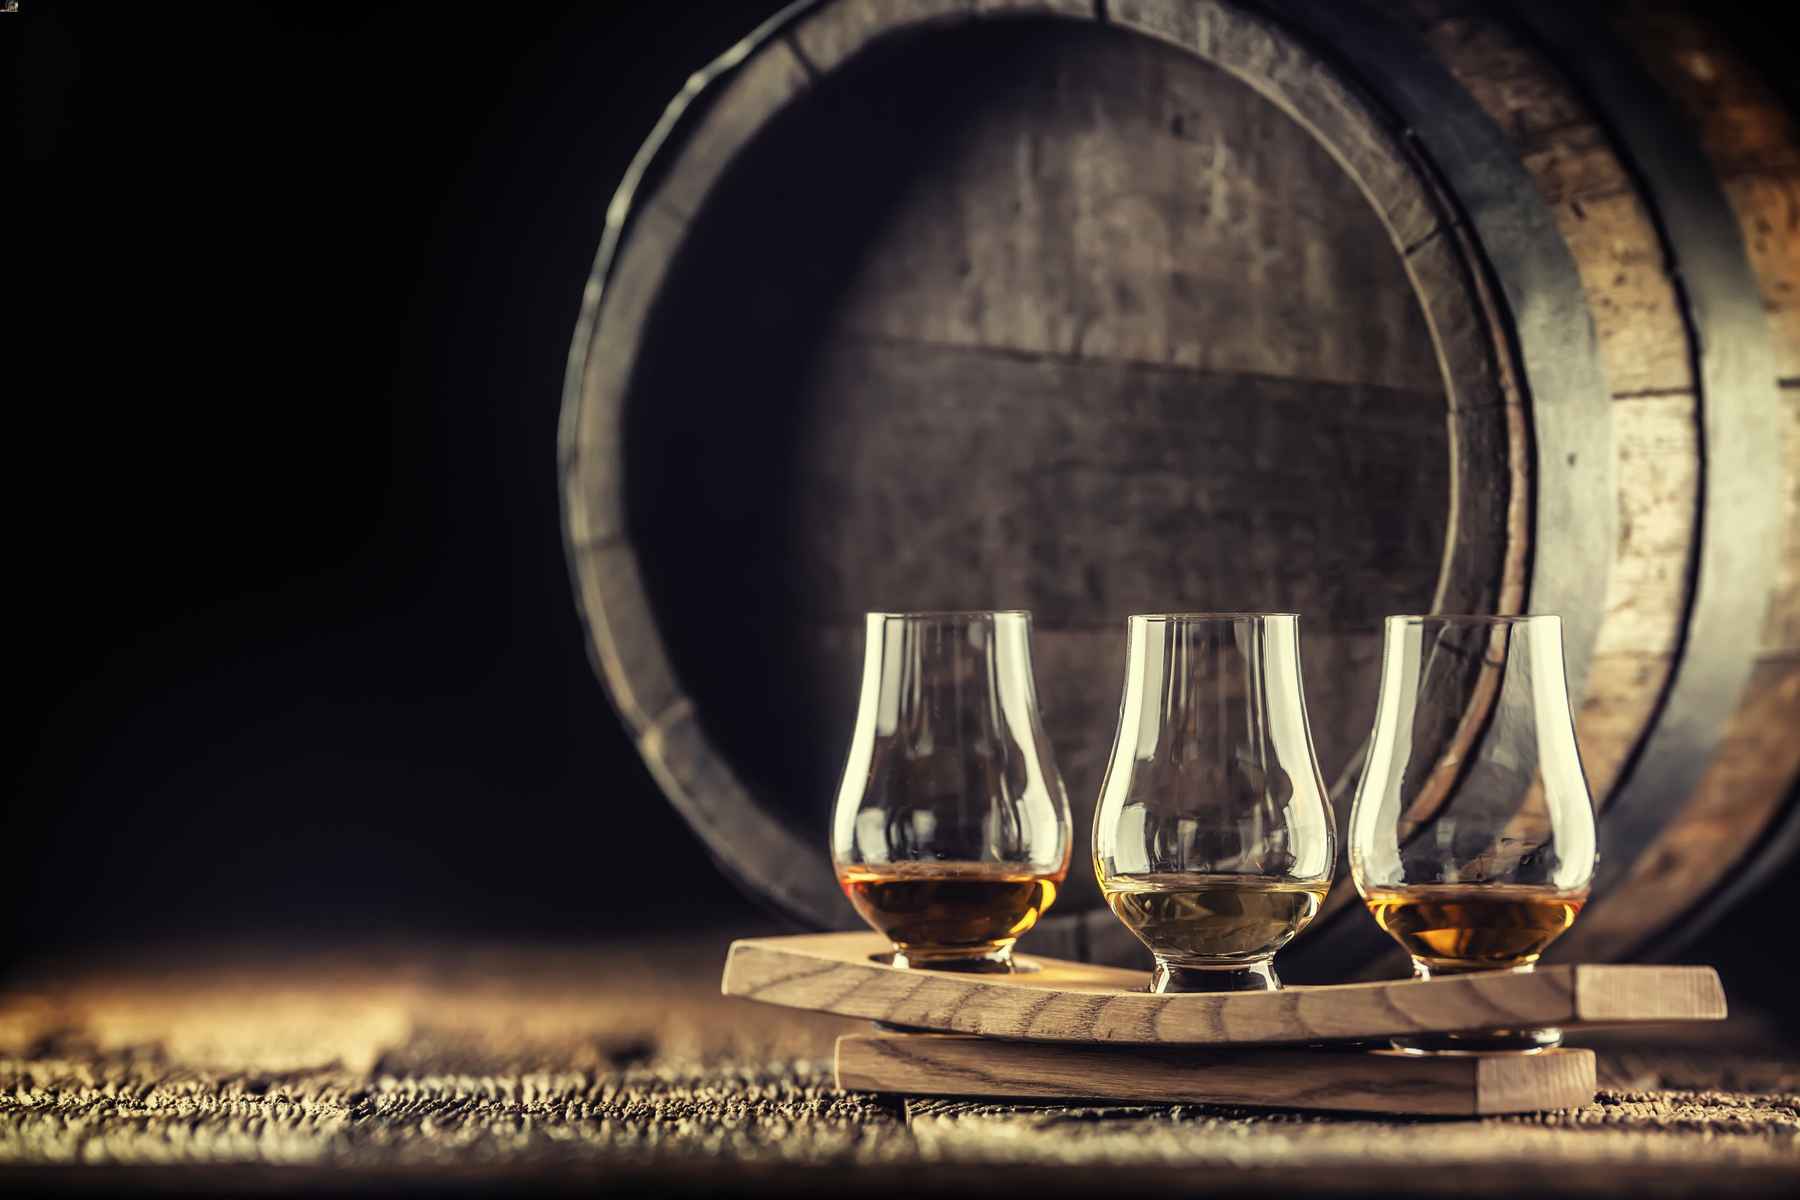 Three whiskey tasting glasses filled with whiskey in front of a barrel.